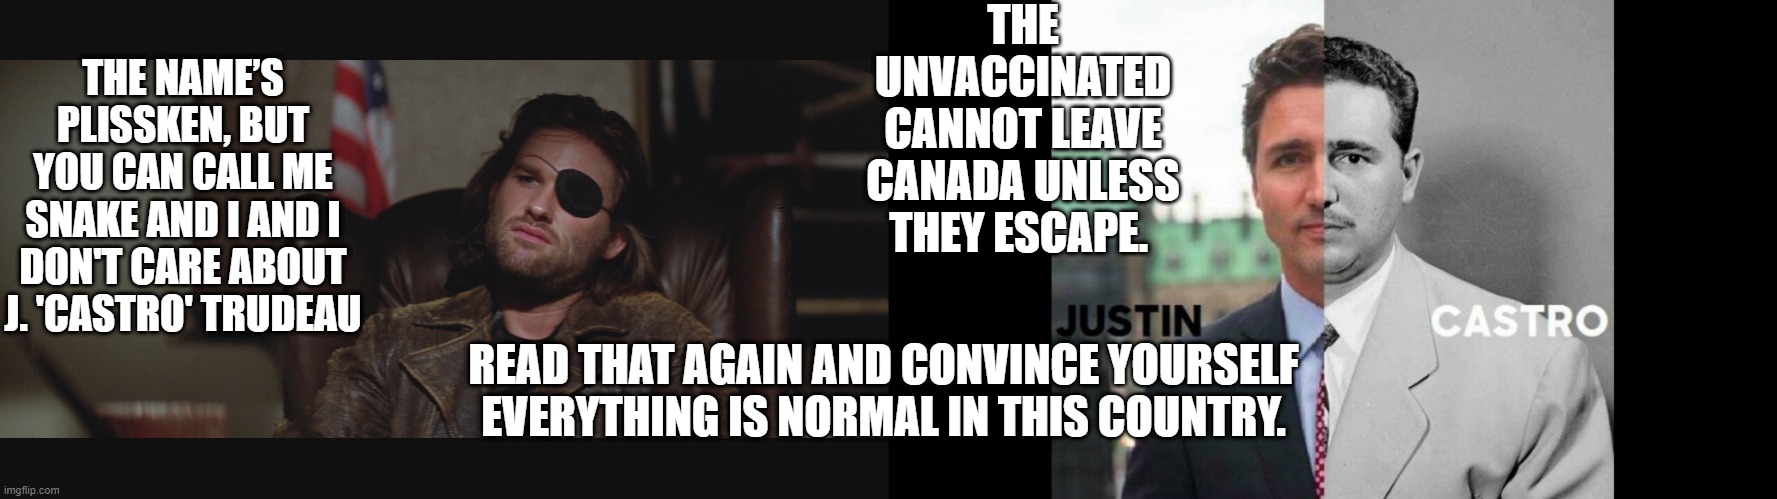 THE UNVACCINATED CANNOT LEAVE CANADA UNLESS THEY ESCAPE. THE NAME’S PLISSKEN, BUT YOU CAN CALL ME SNAKE AND I AND I DON'T CARE ABOUT J. 'CASTRO' TRUDEAU; READ THAT AGAIN AND CONVINCE YOURSELF EVERYTHING IS NORMAL IN THIS COUNTRY. | image tagged in snake plissken,tyrant trudeau,oppression,tyranny,fidel castro,political | made w/ Imgflip meme maker